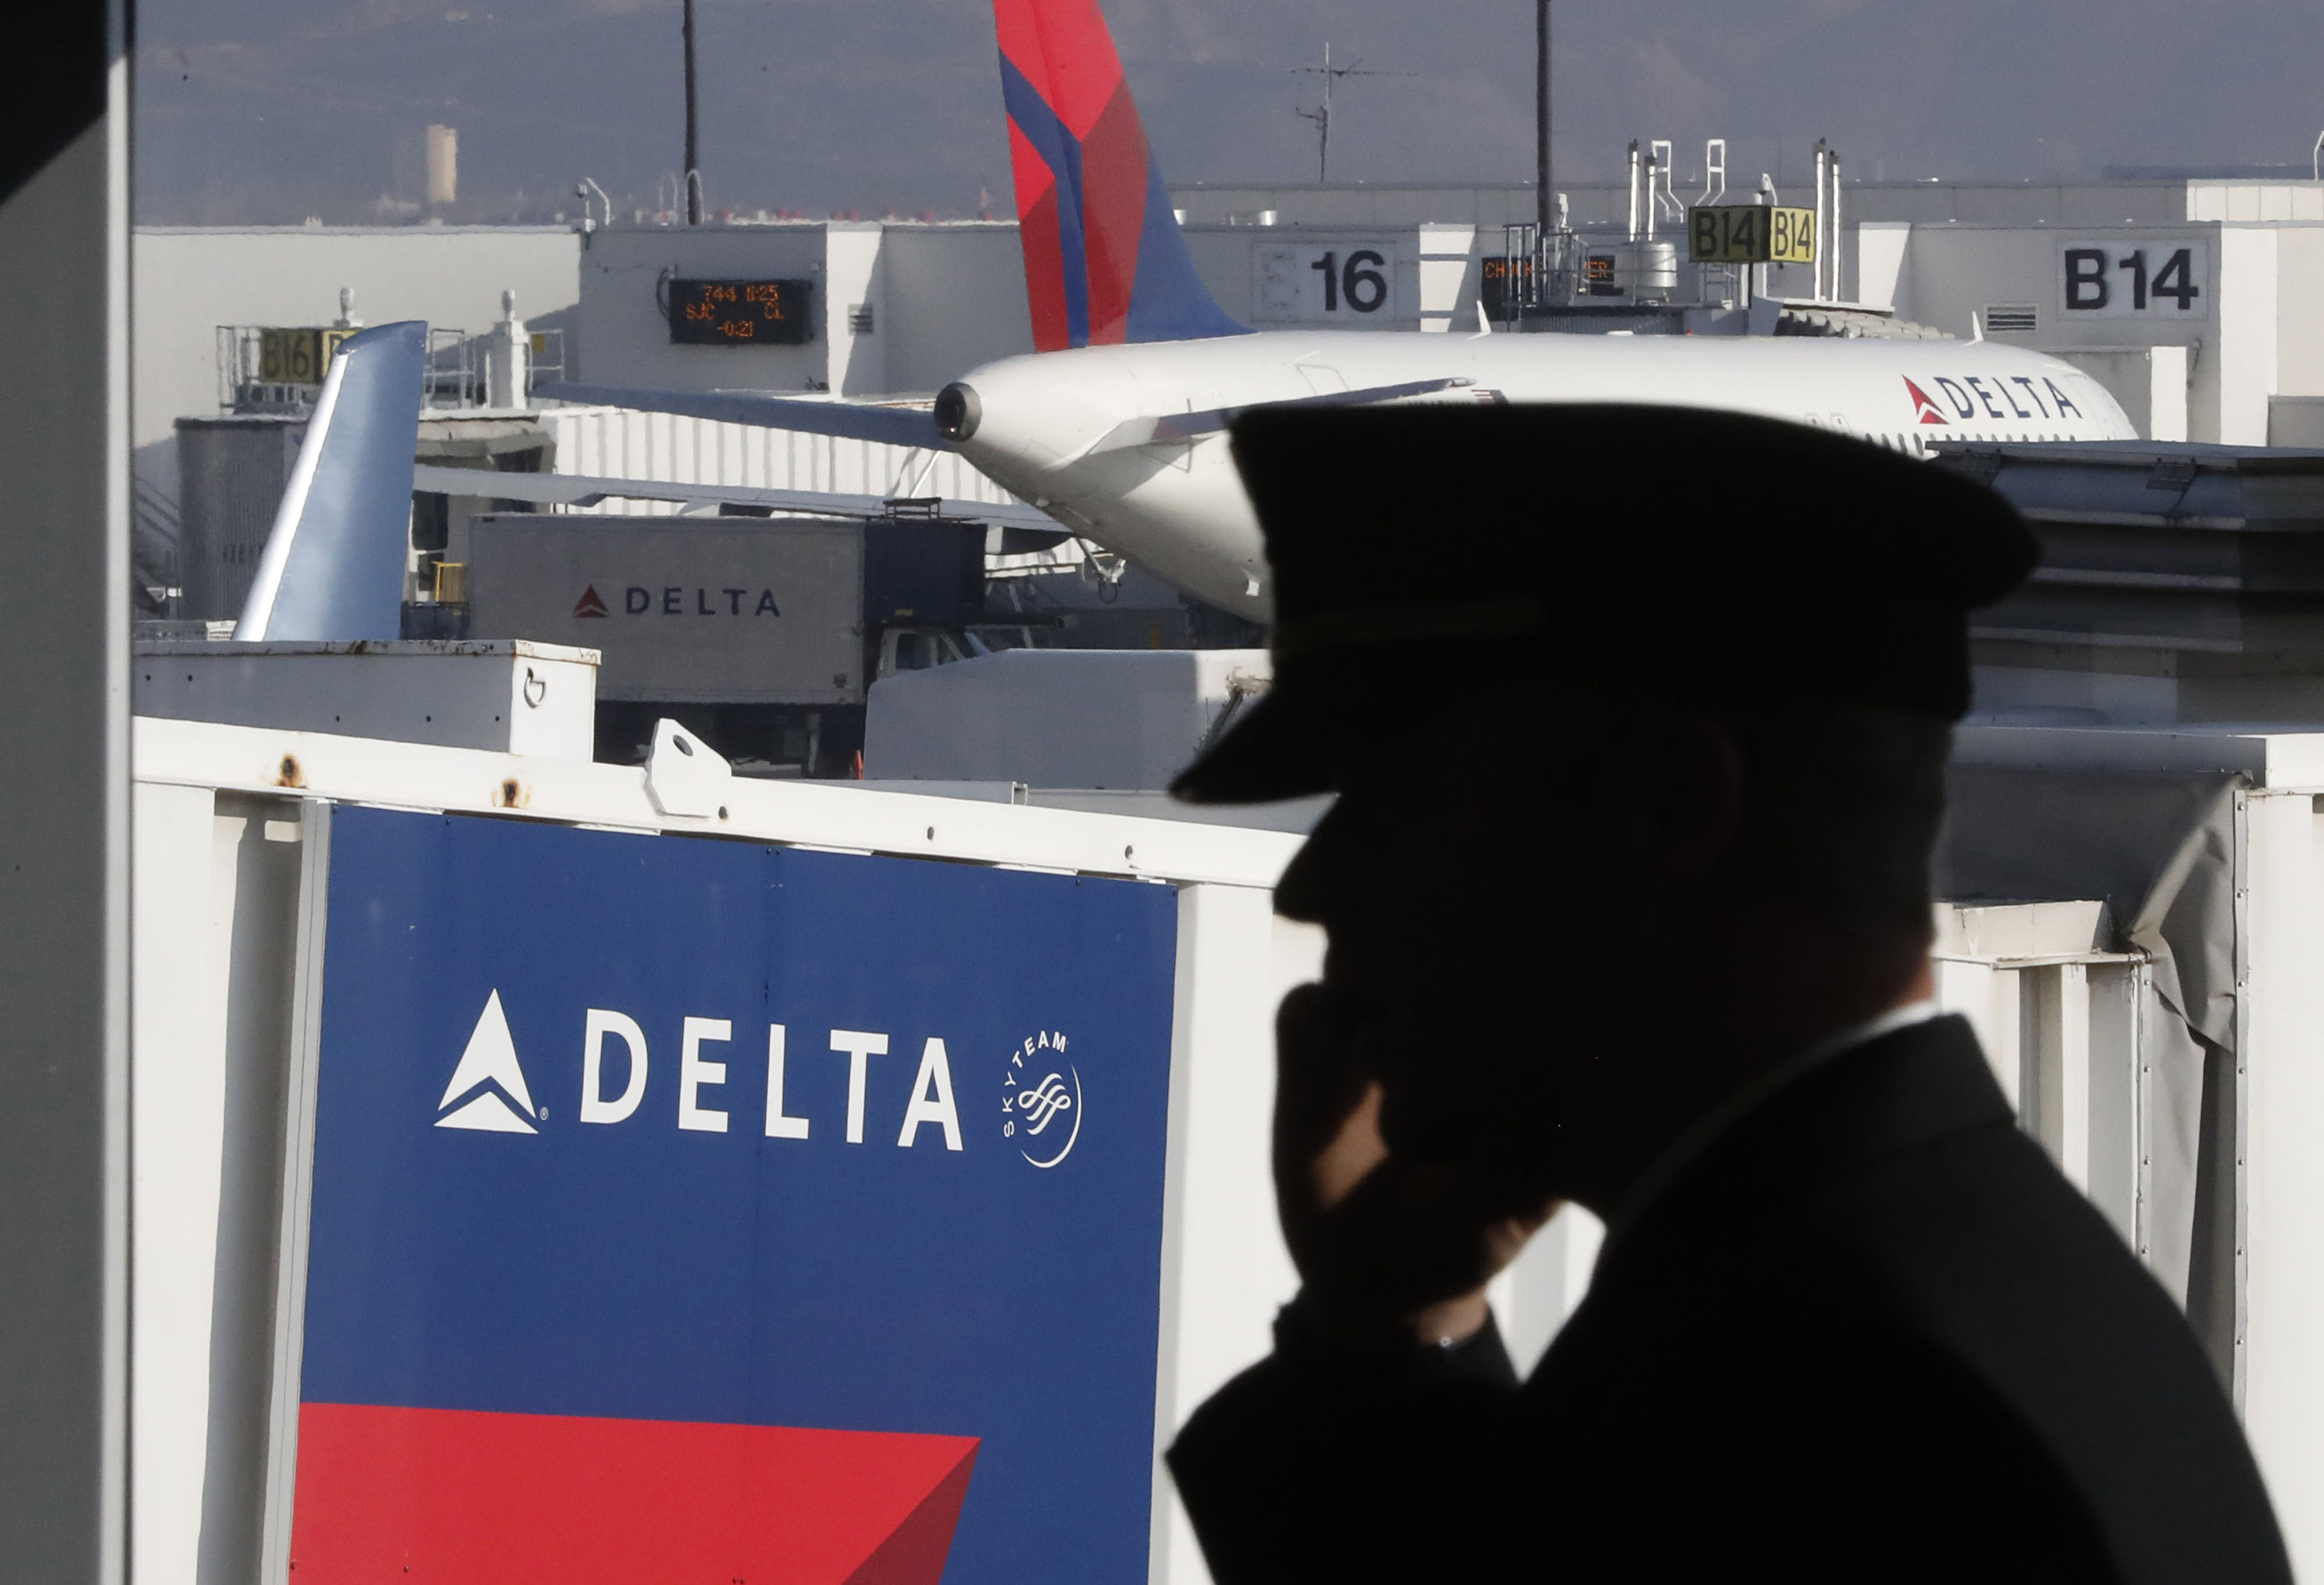 Delta pilots approve cost-cutting measures to avoid furloughs until 2022